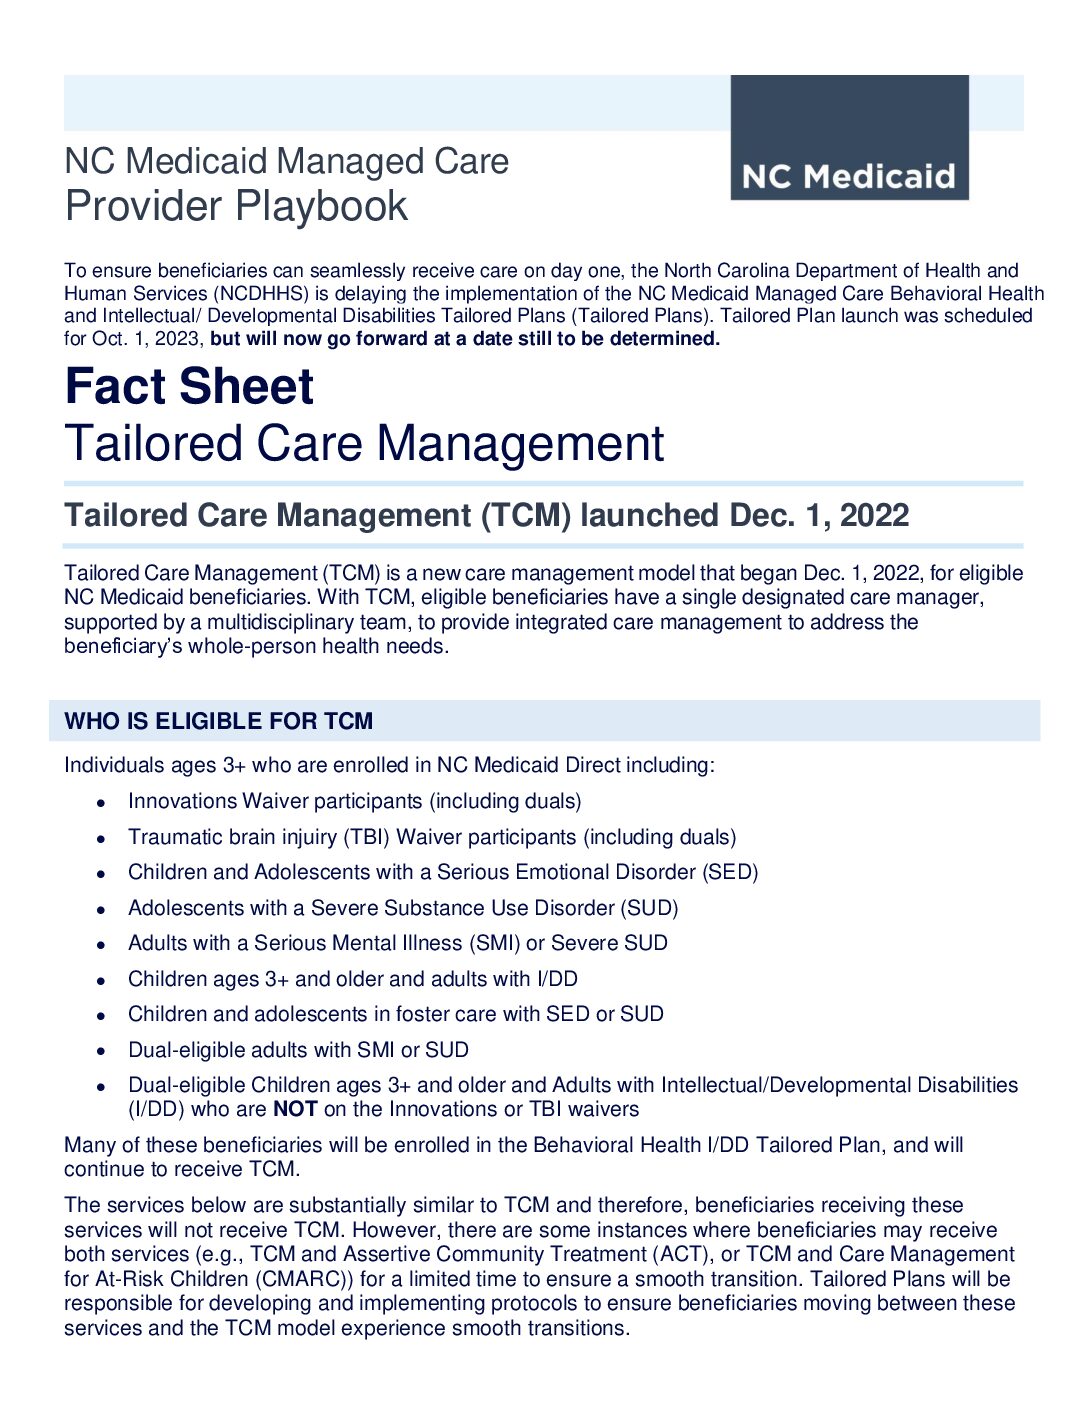 Fact Sheet- Tailored Care Management